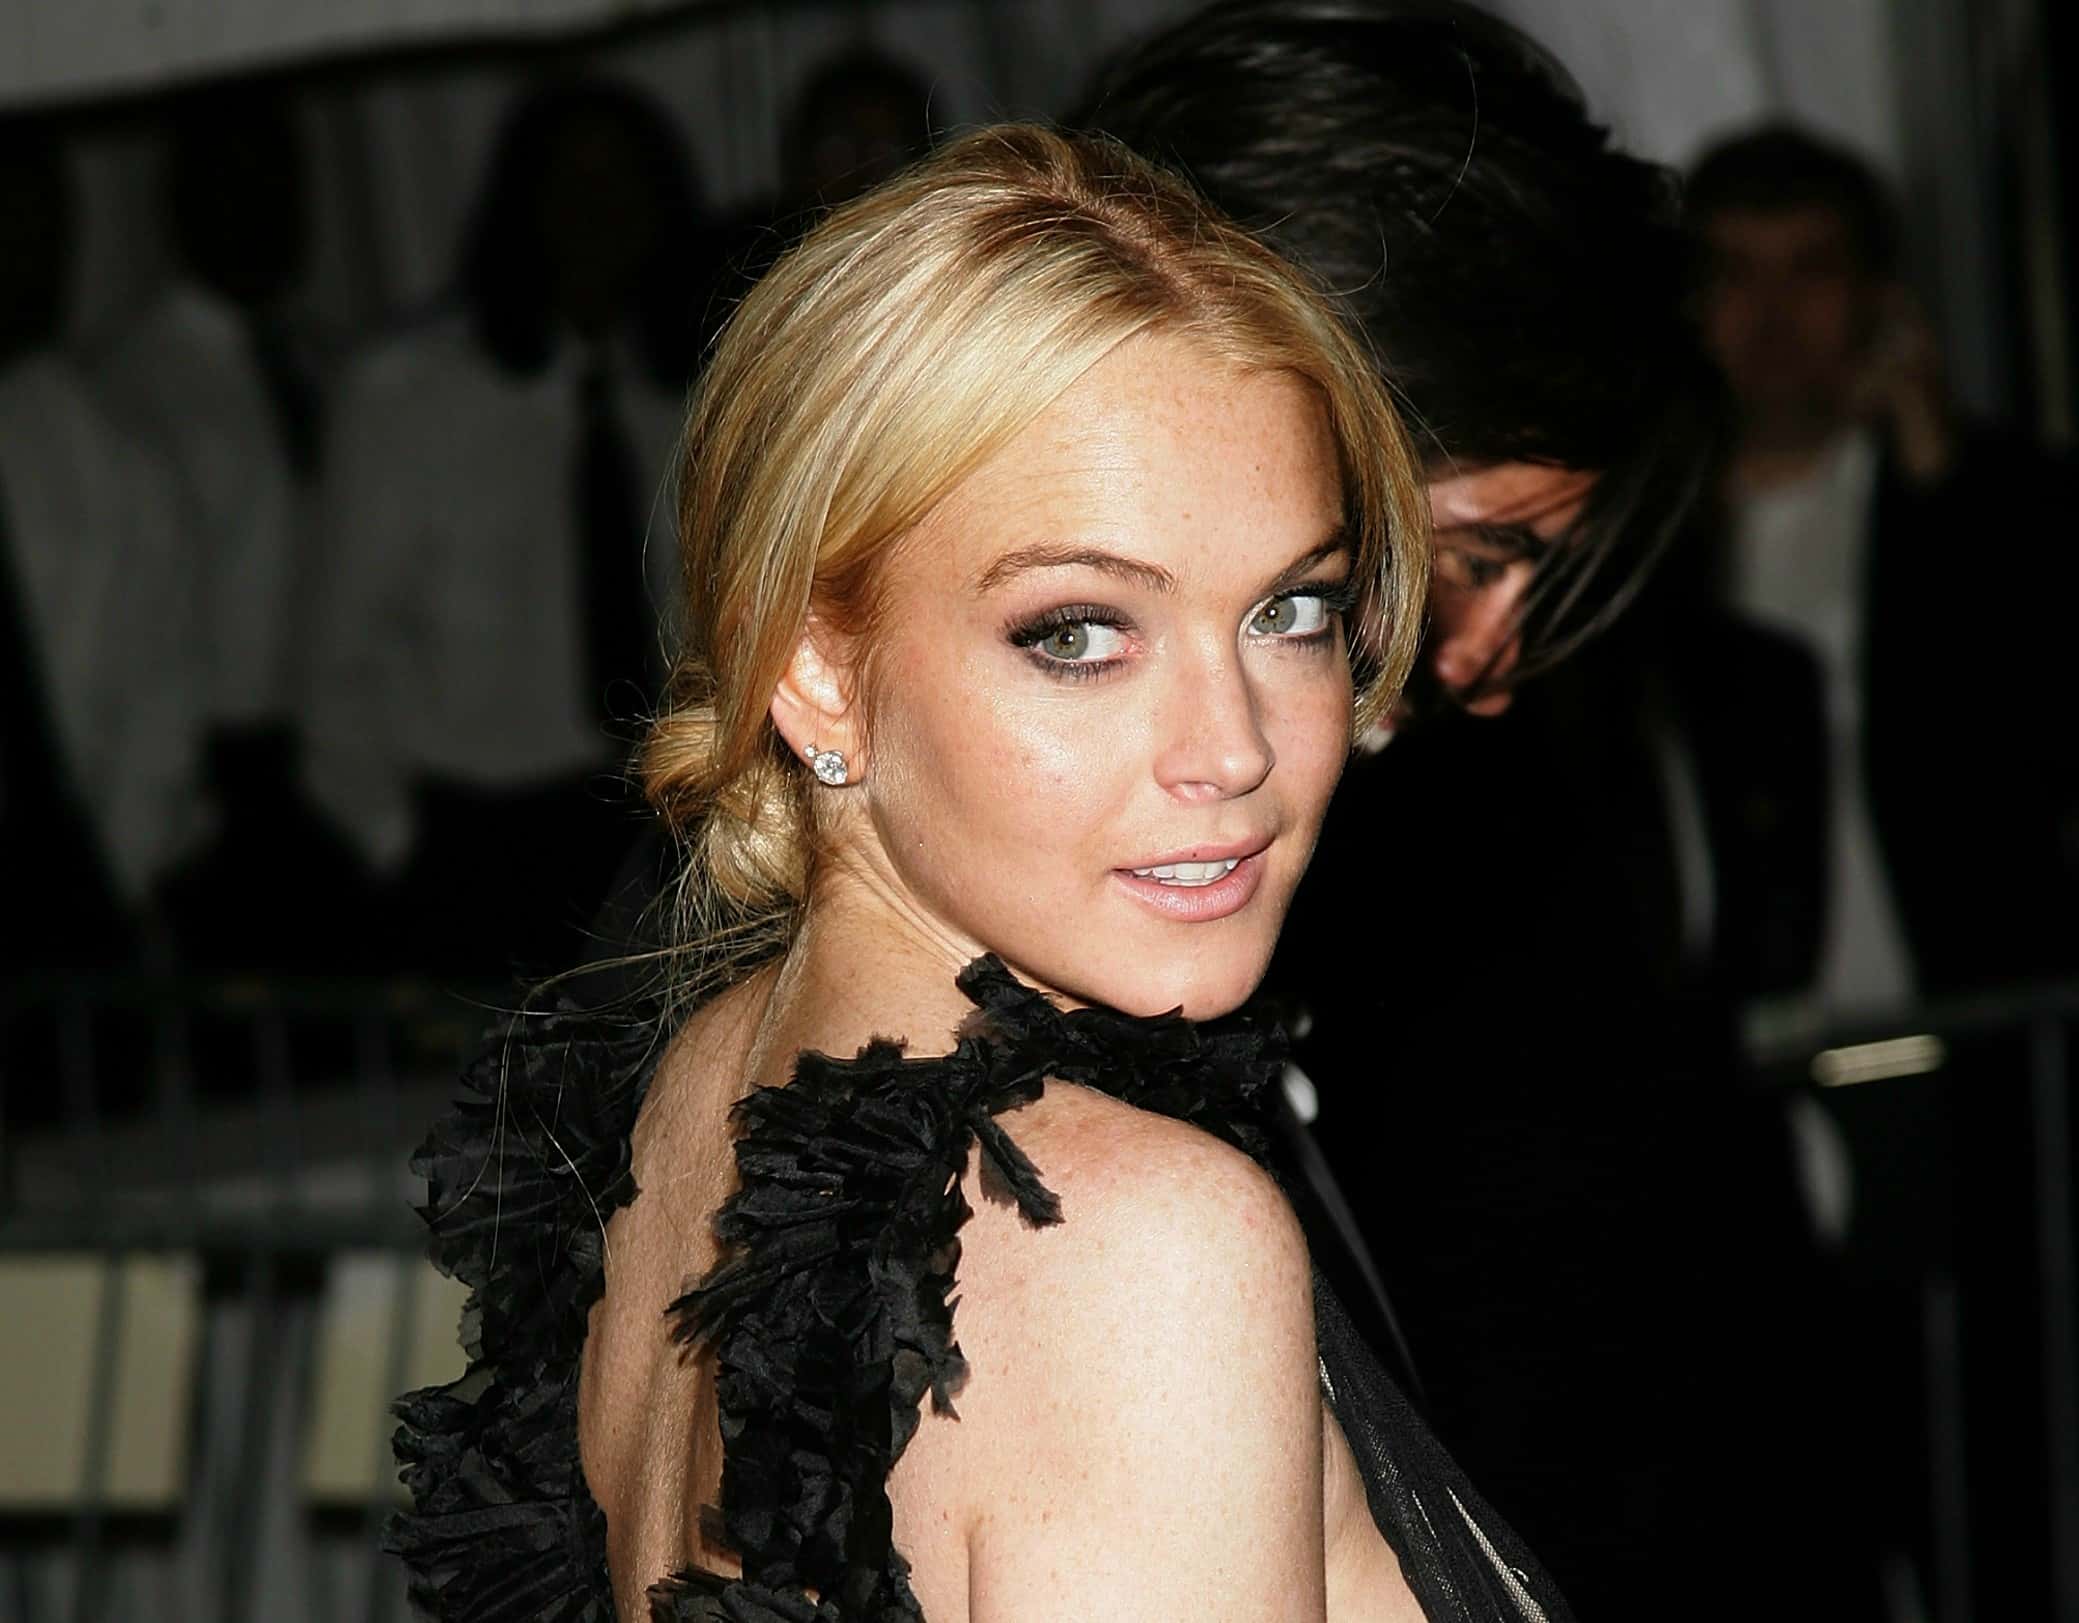 45 Dramatic Facts About Lindsay Lohan